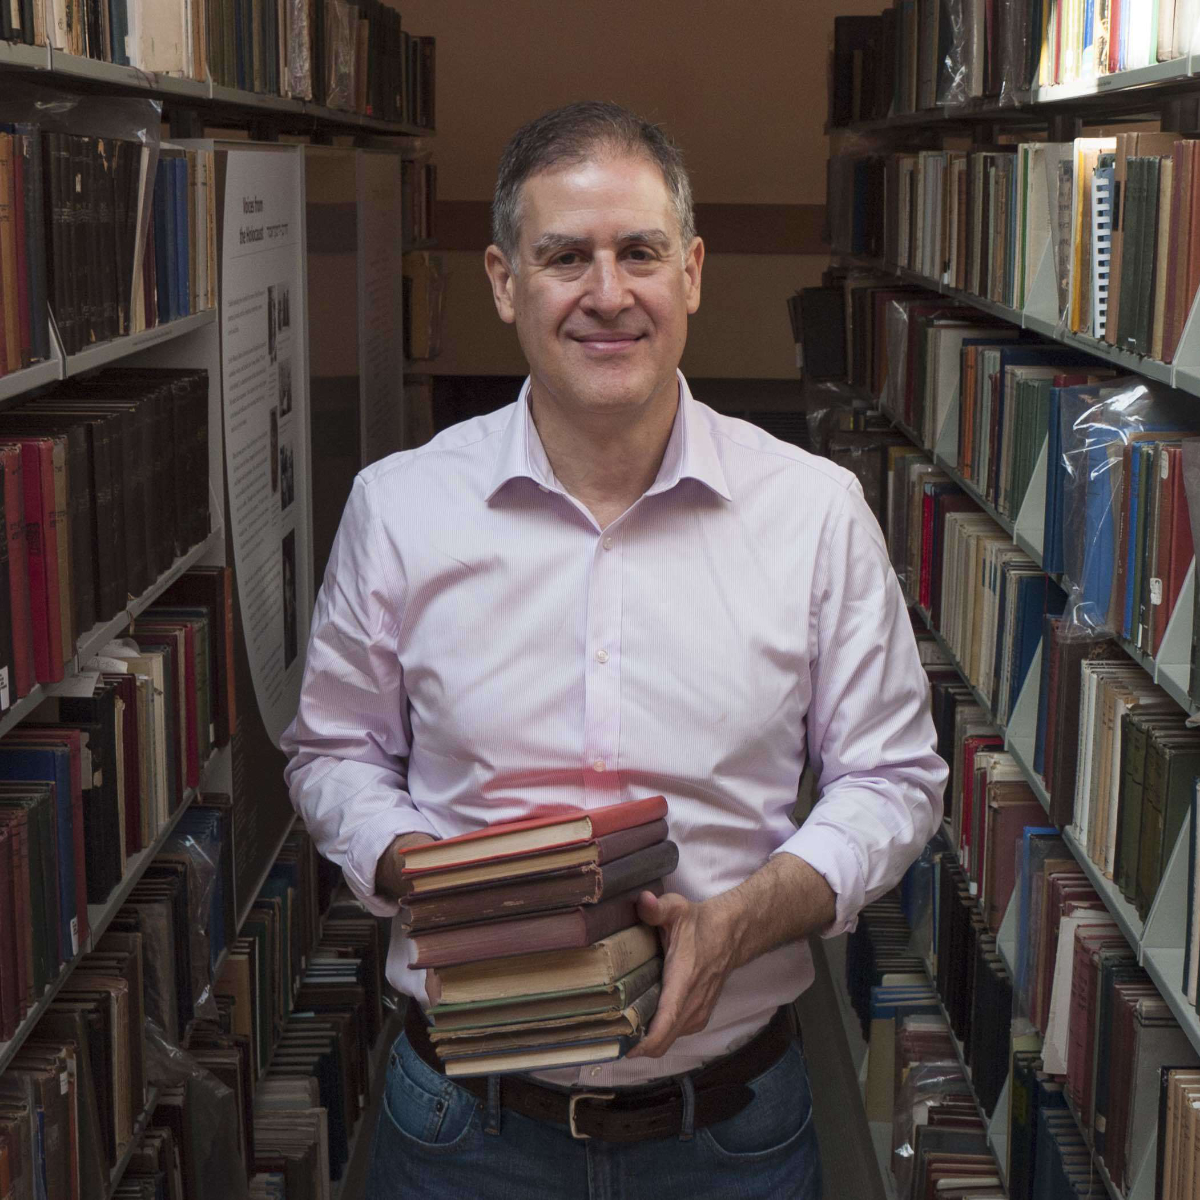 📢LAST CHANCE TO BOOK📢 Join us TONIGHT as David Mazower (of @YiddishBookCtr & former @BBCNews editor) takes us on a journey around the world in Yiddish culture. 🕖7.30pm🎟️FREE💻Zoom jewishrenaissance.org.uk/events Hosted with @LyonsLearning